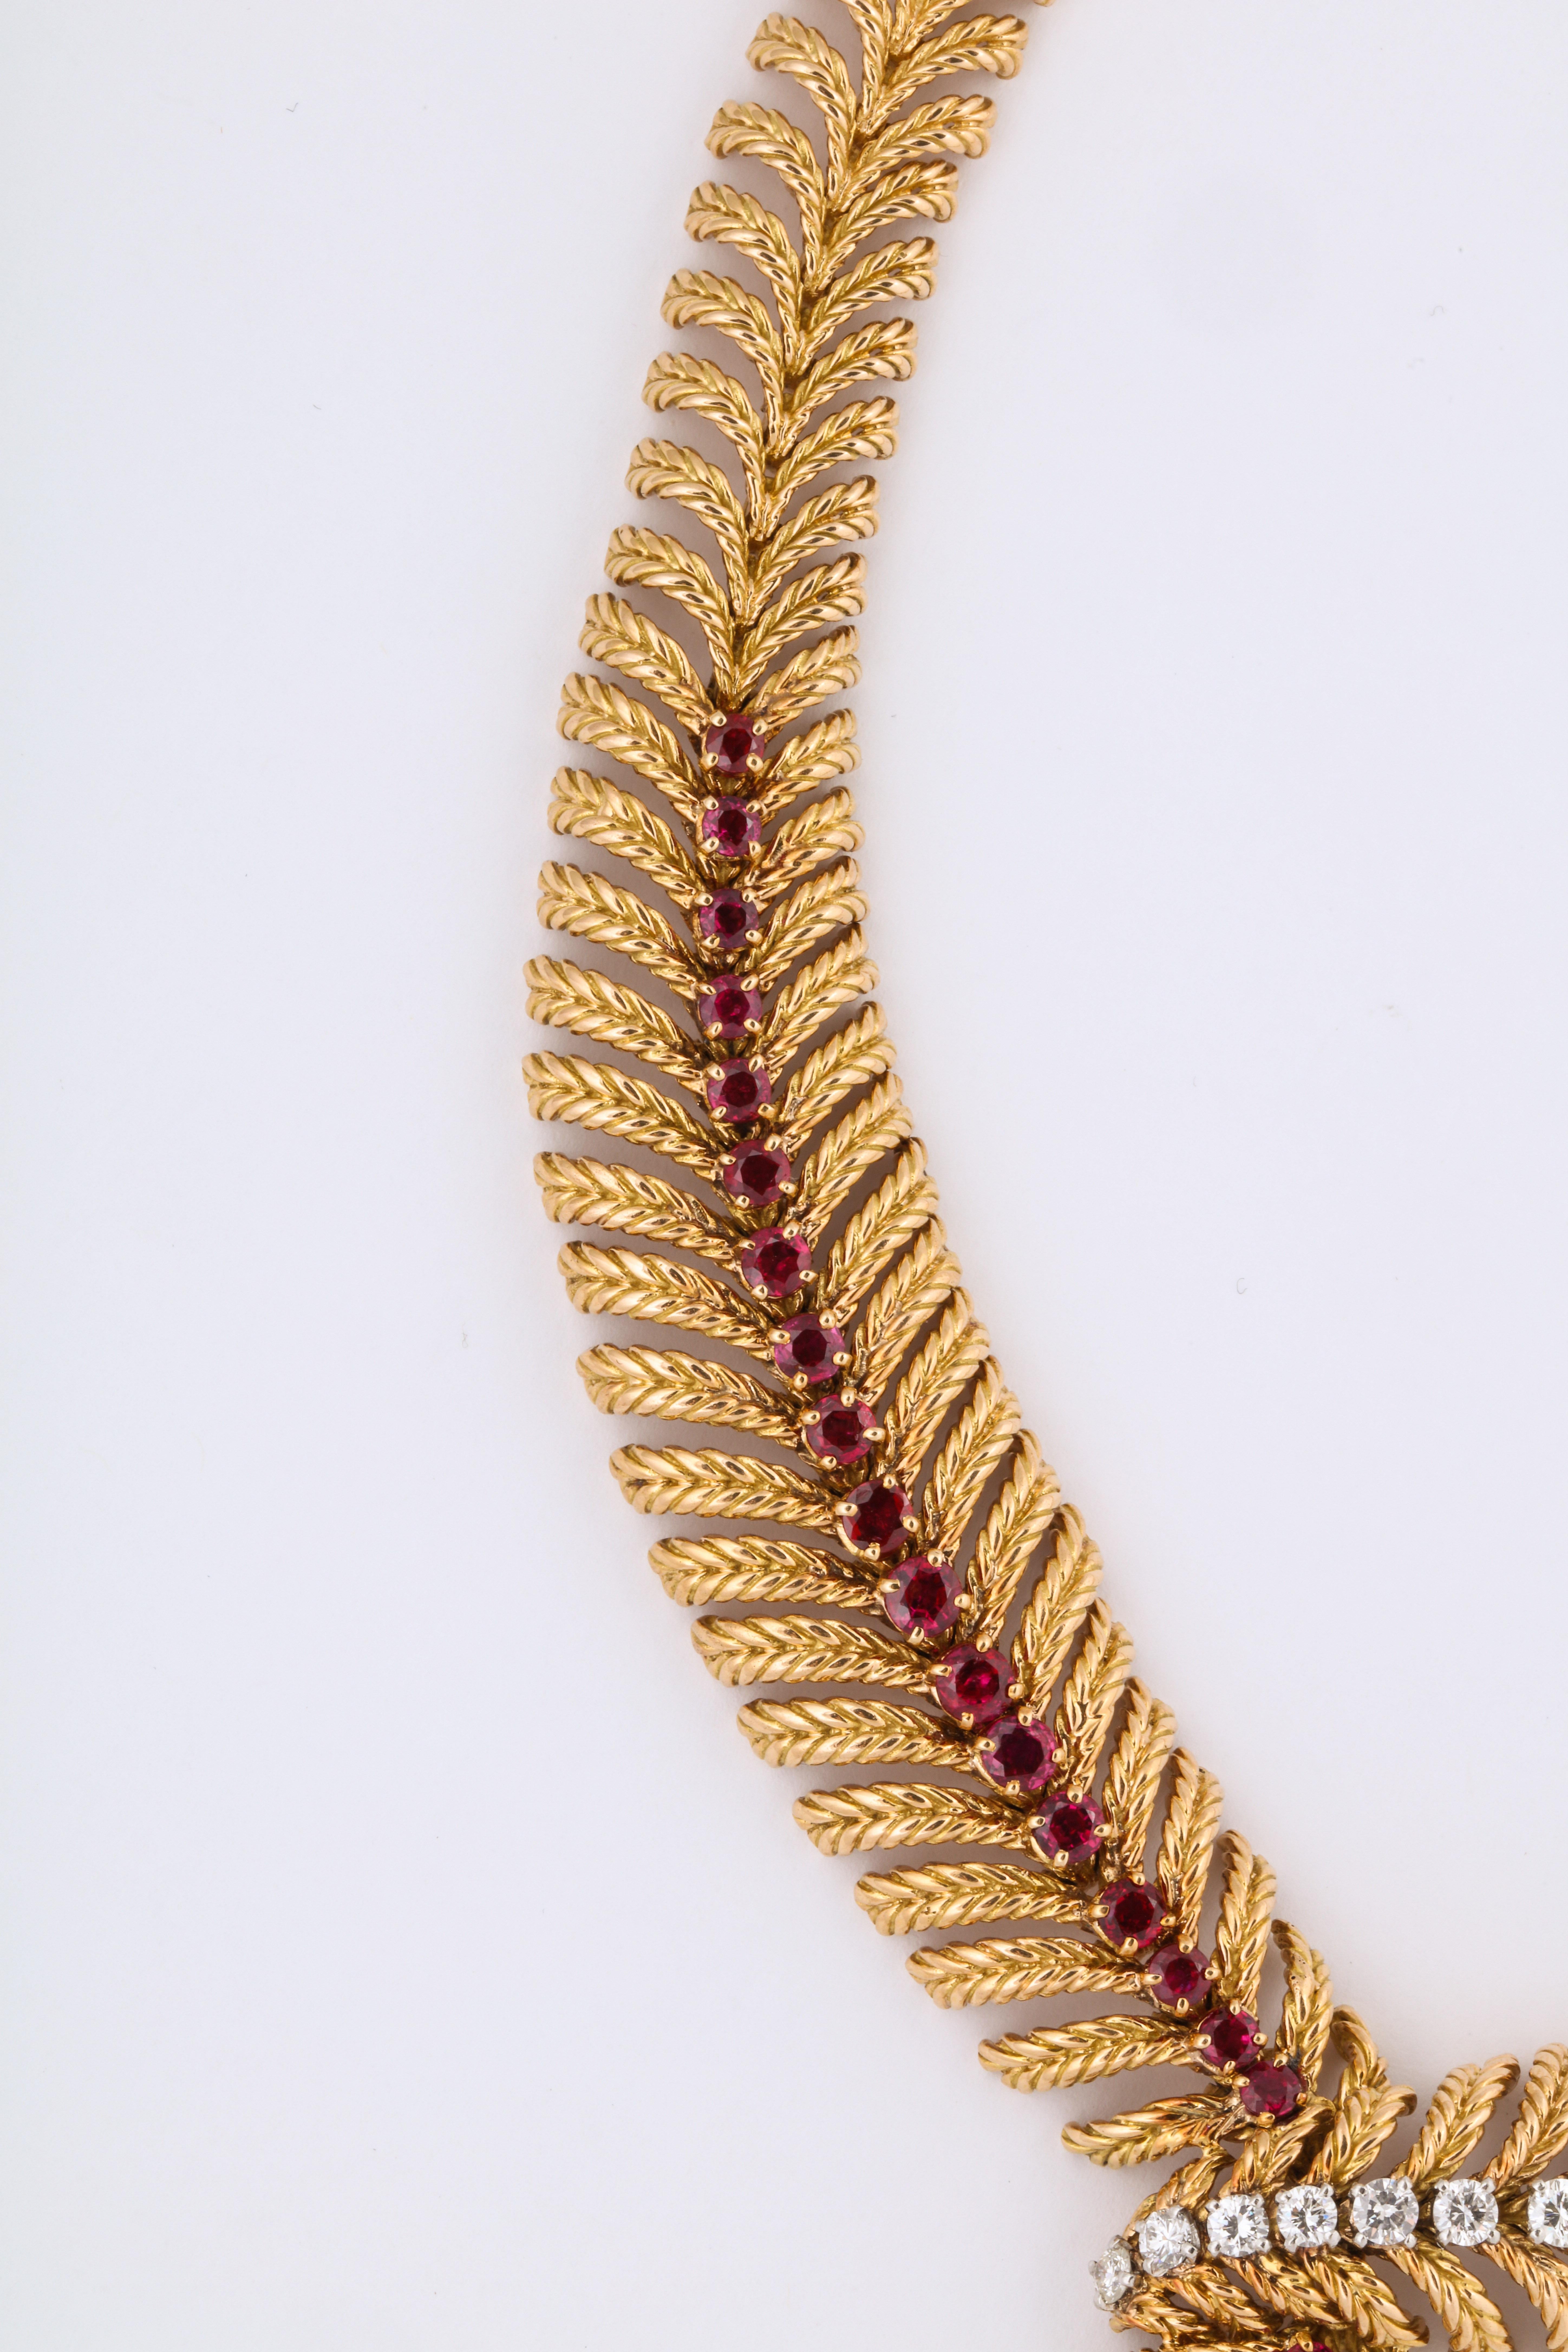 An amazingly soft and flexible textured gold necklace made in Paris in 1960 with a row of red, red rubies and a diamond cross over.  Classic box clasp with tongue and safety closure at the back.  This necklace is so supple and perfectly achieves